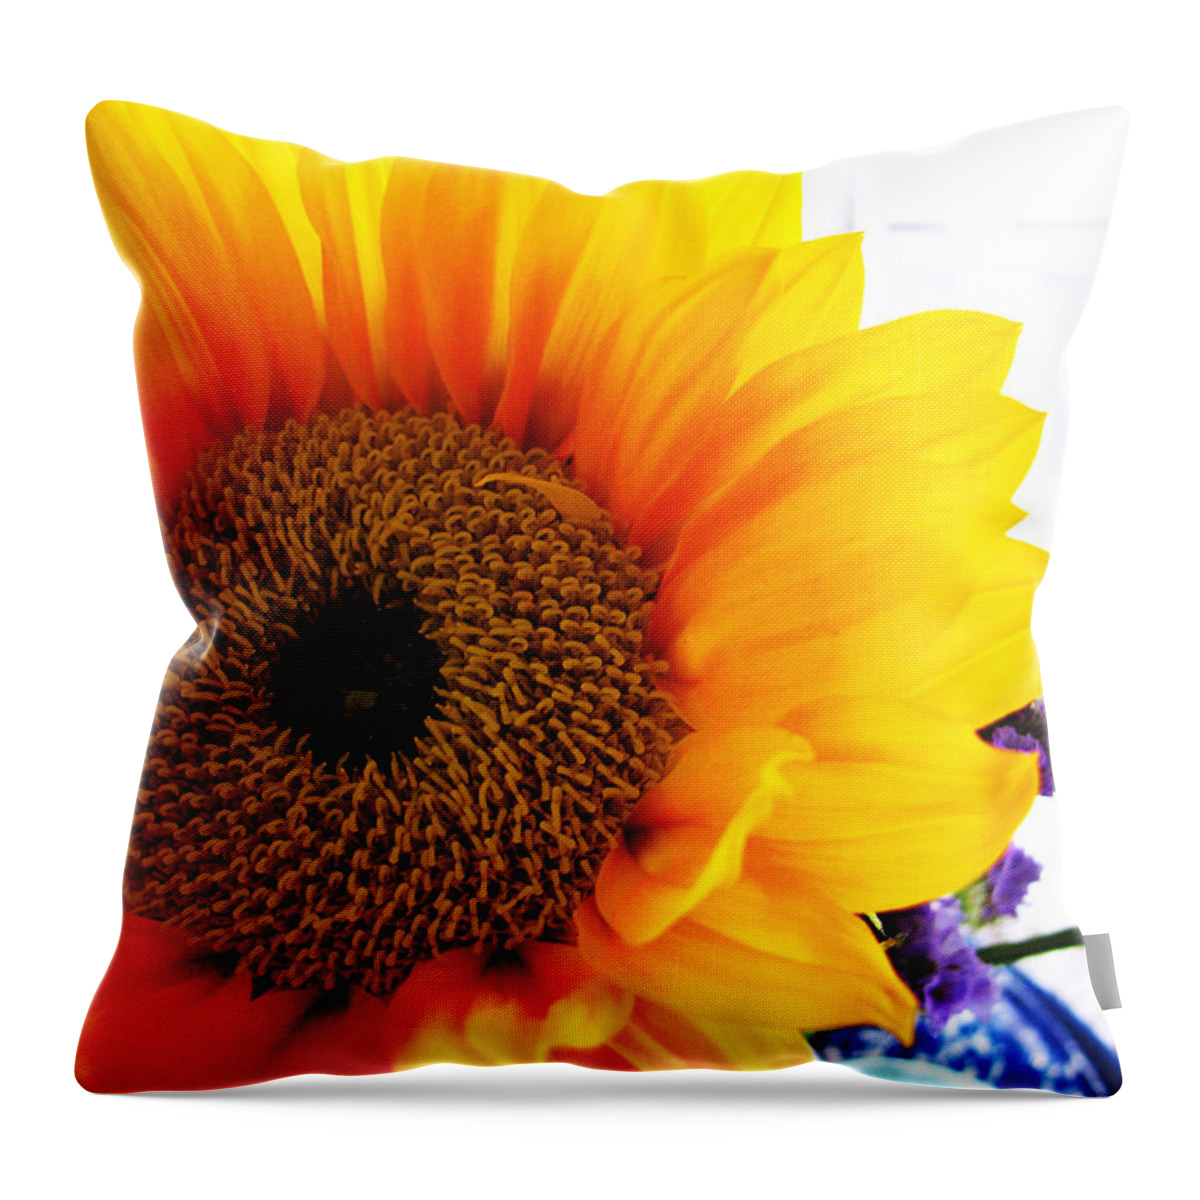 Sunflower Throw Pillow featuring the photograph Sunflower by Colleen Kammerer